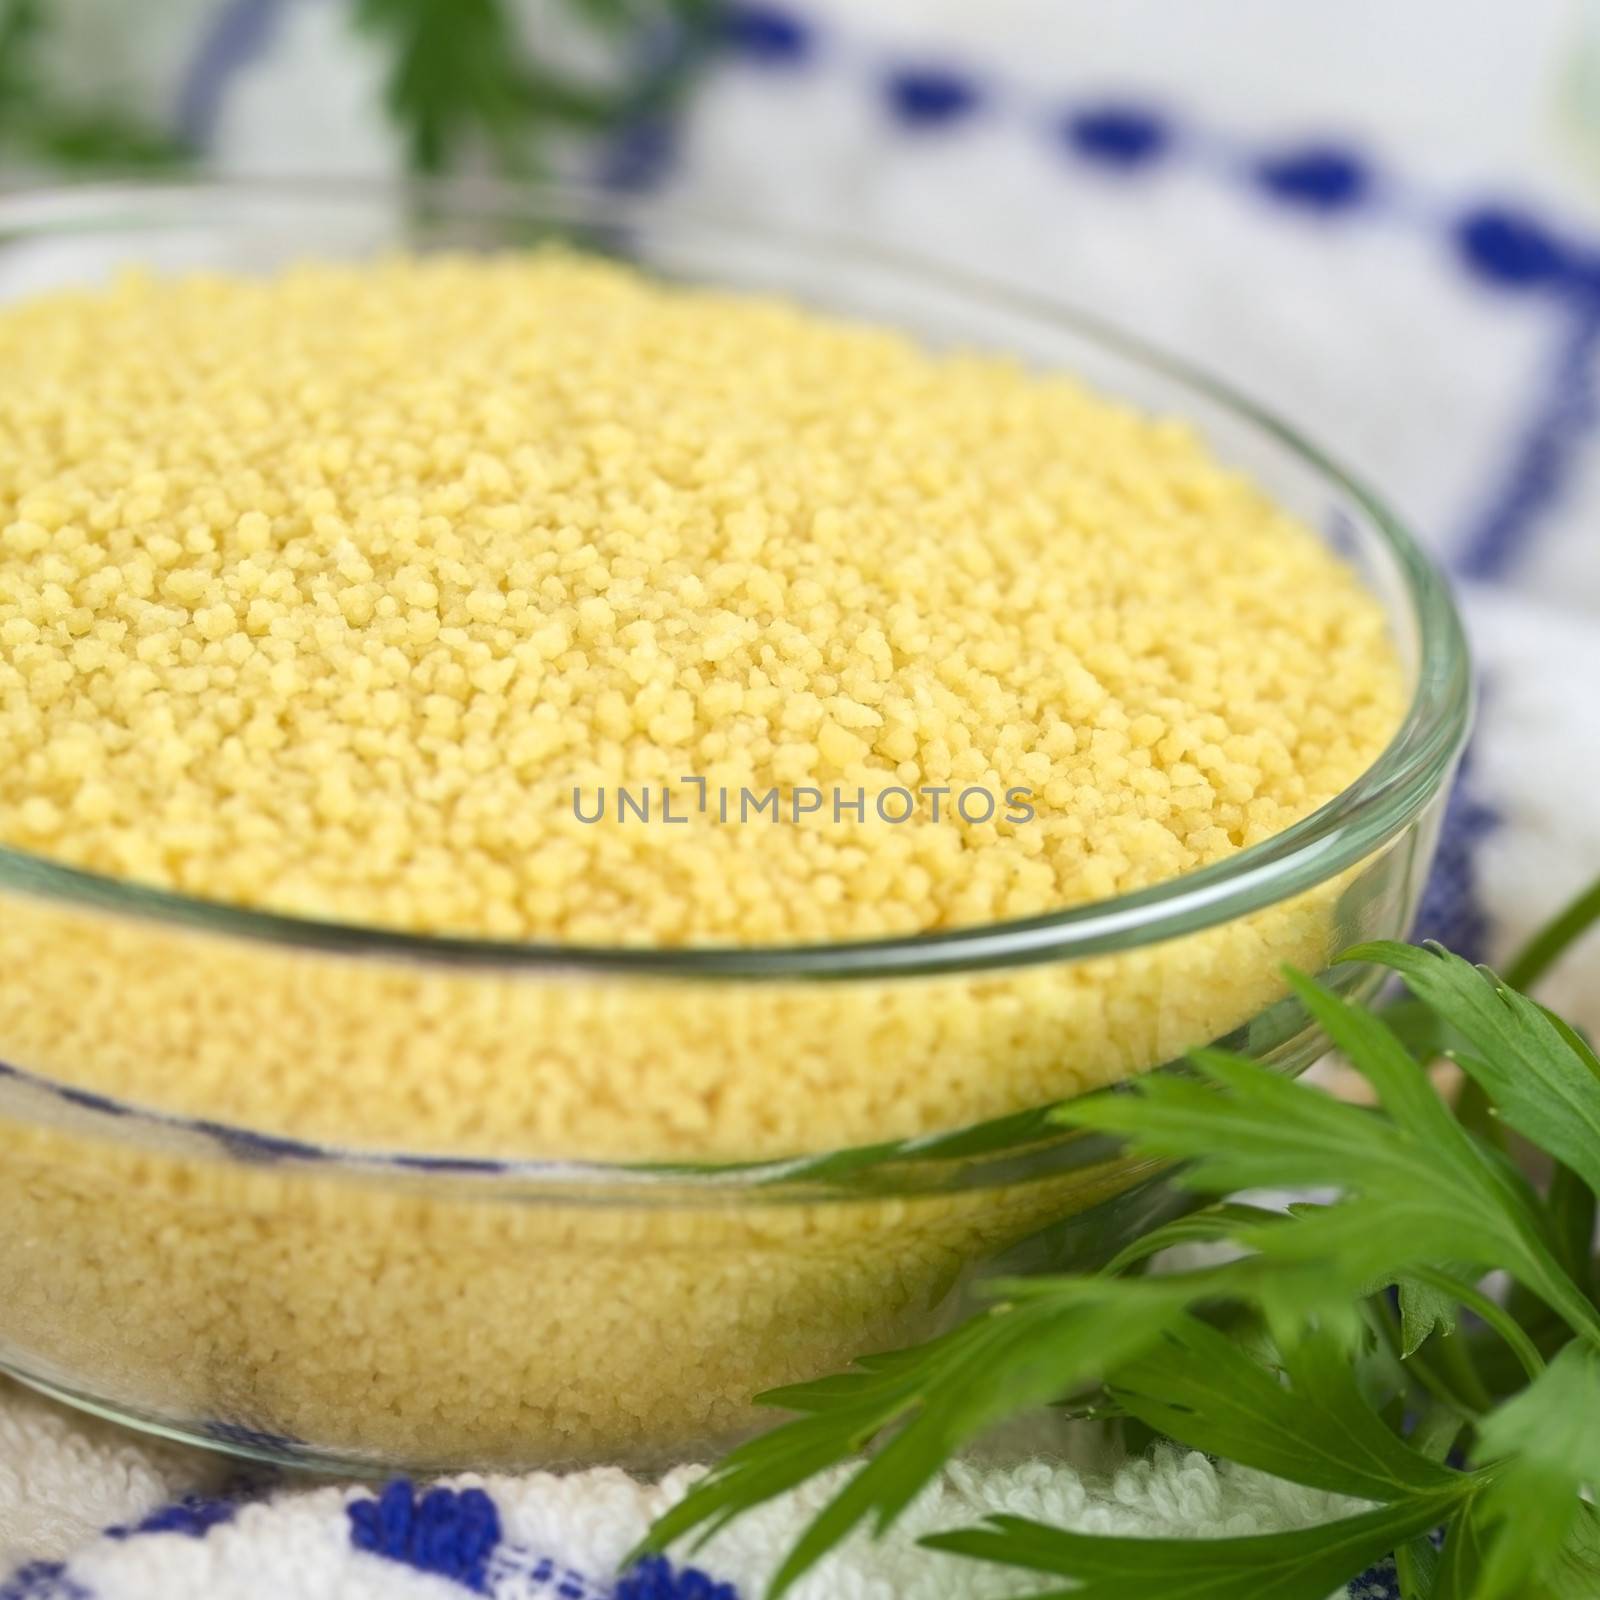 Raw couscous in glass bowl with parsley on the side on kitchen towel (Selective Focus, Focus one third into the couscous)